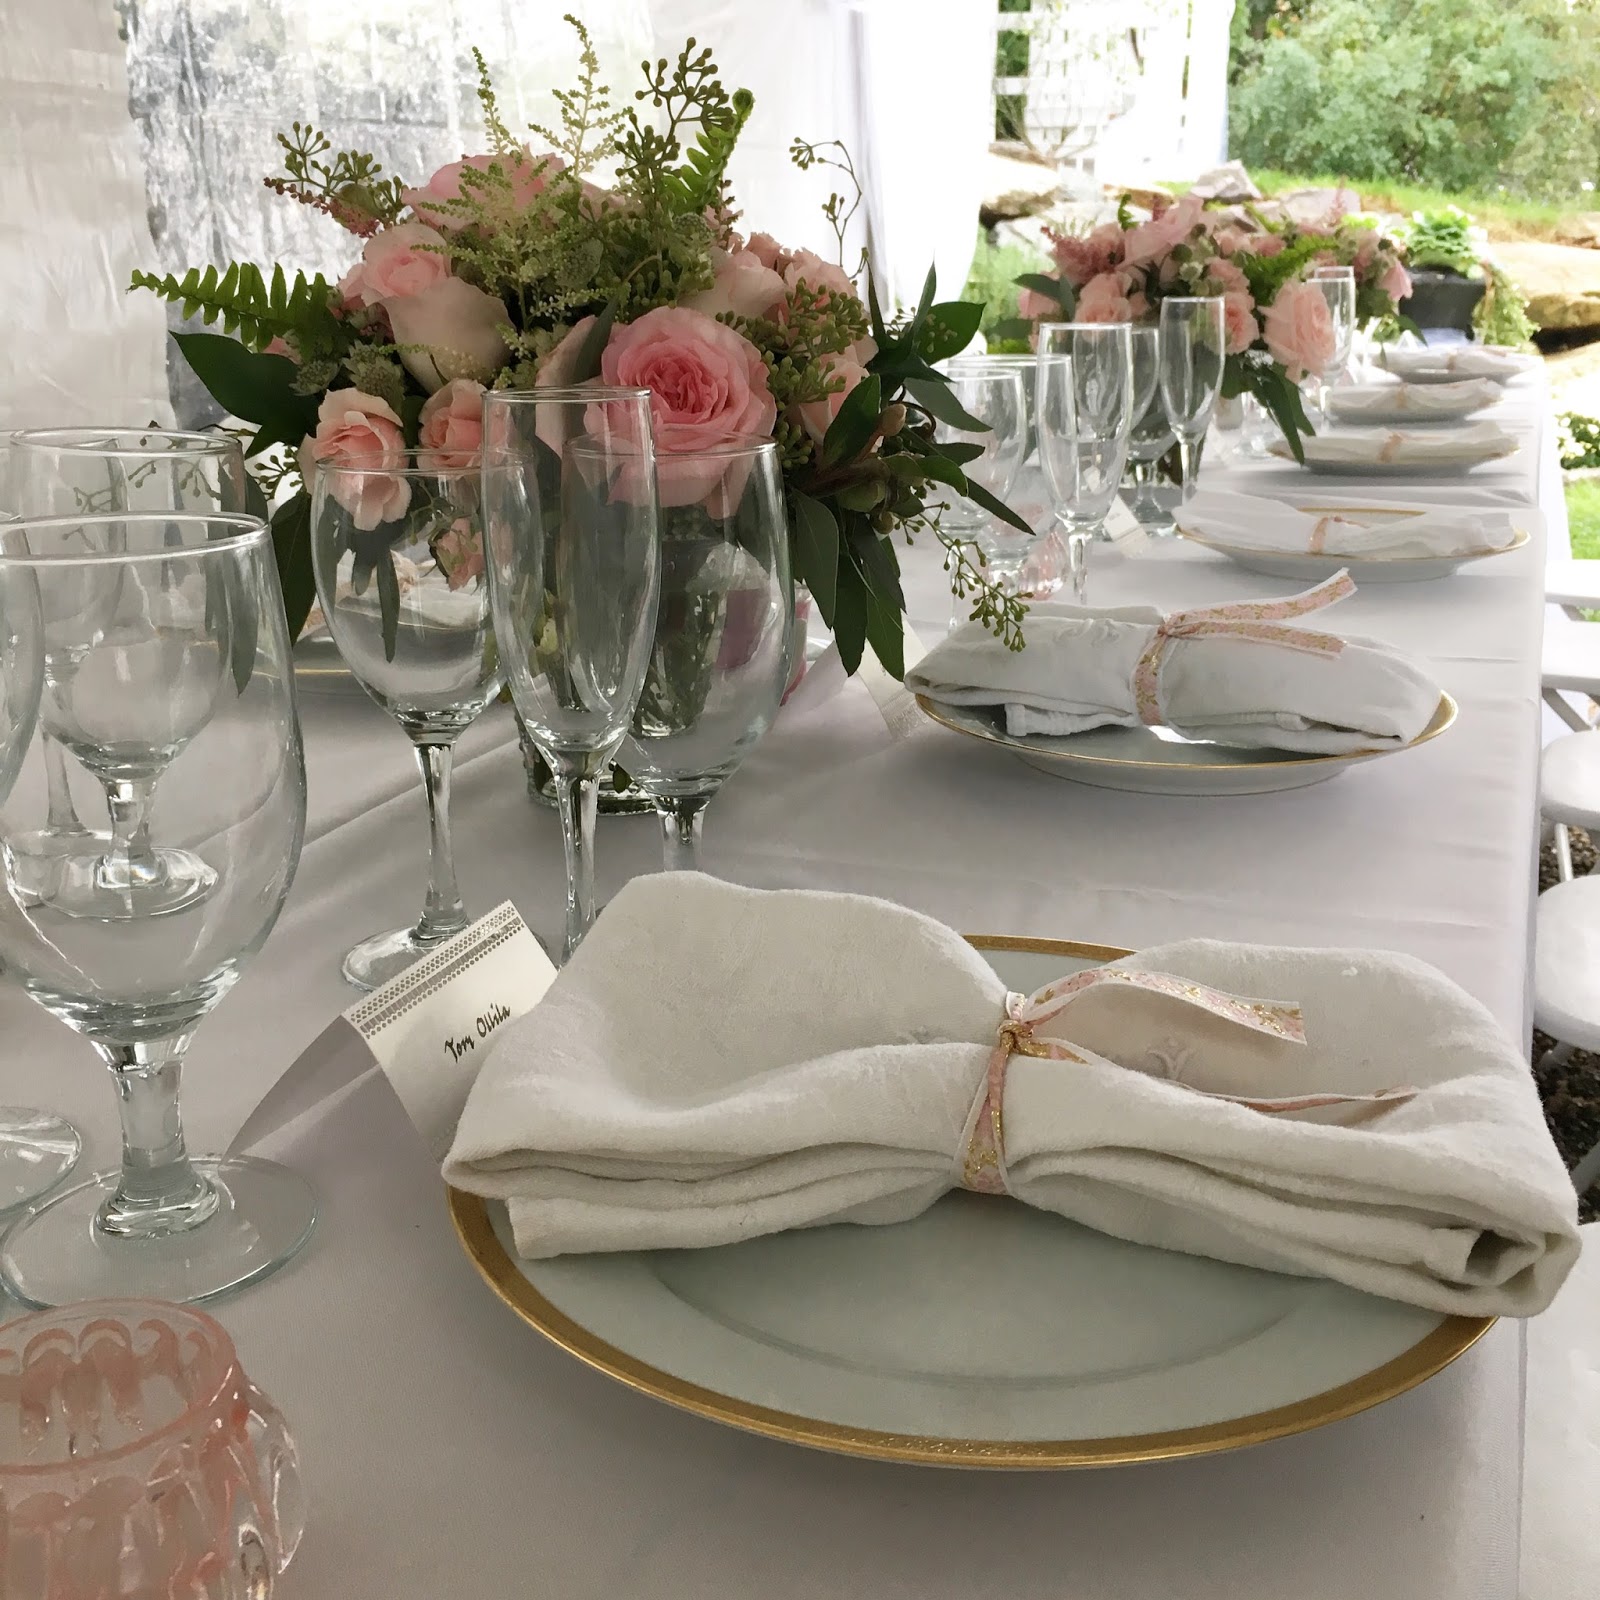 Maison Decor: Romantic Home Wedding Part Two: Dreamy Table Setting Tips